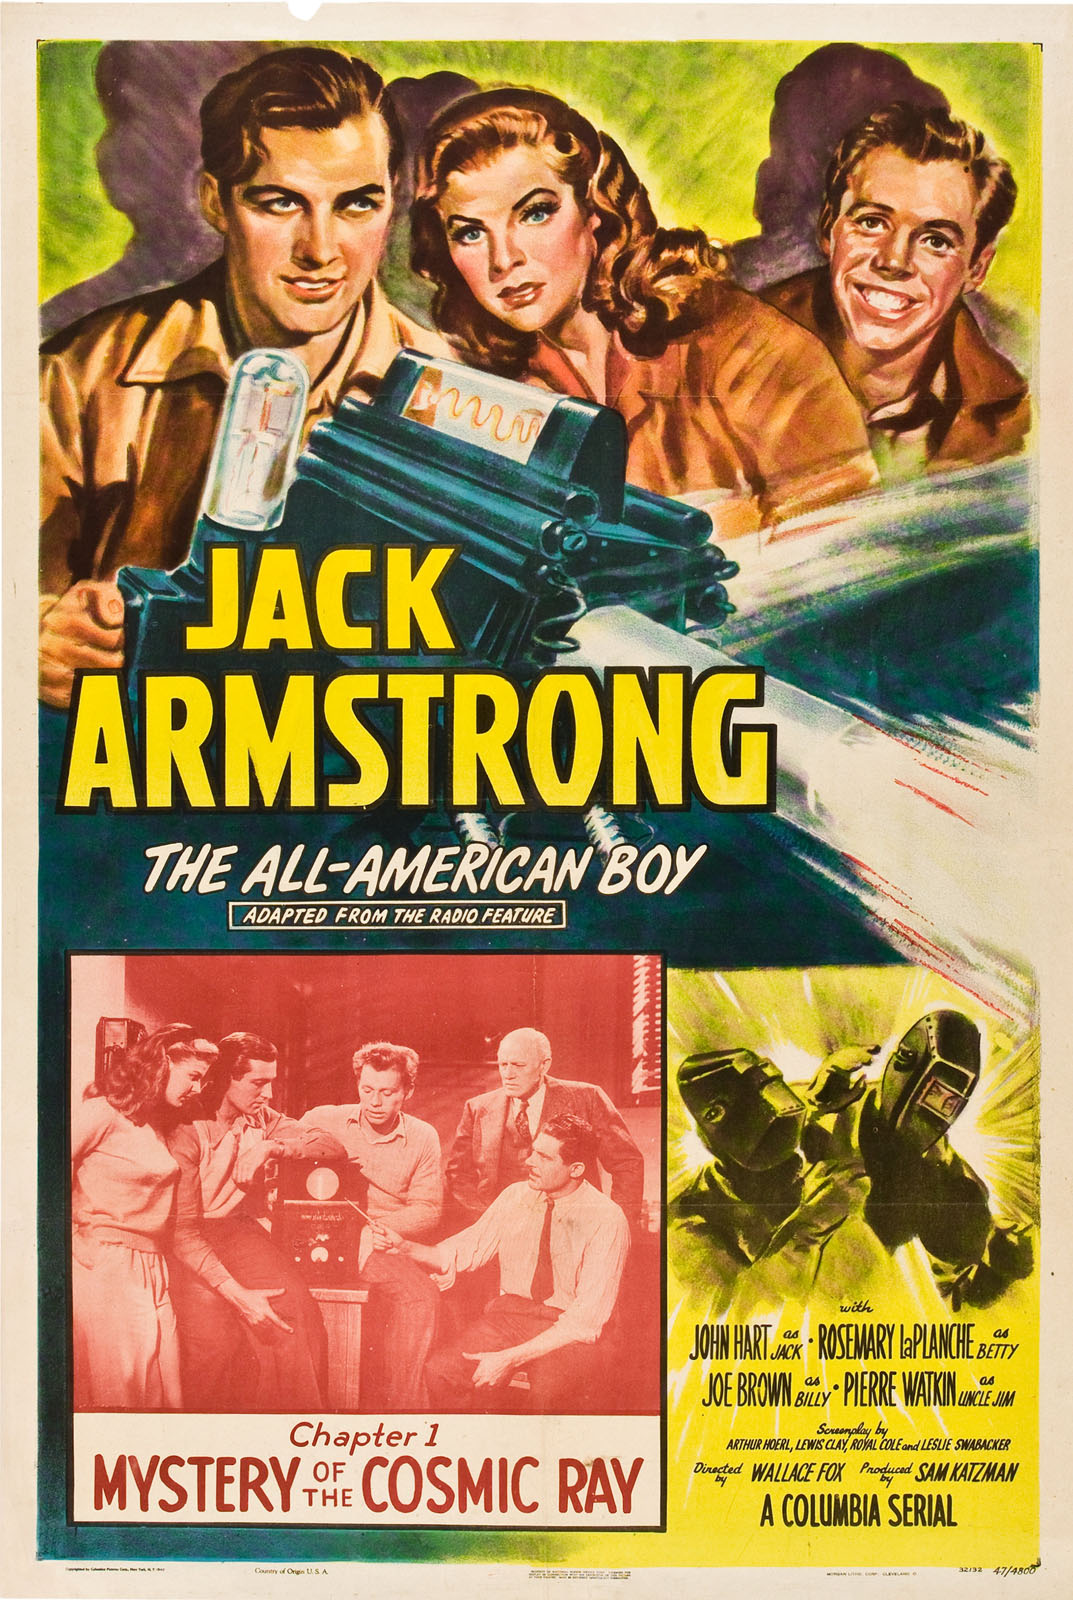 JACK ARMSTRONG